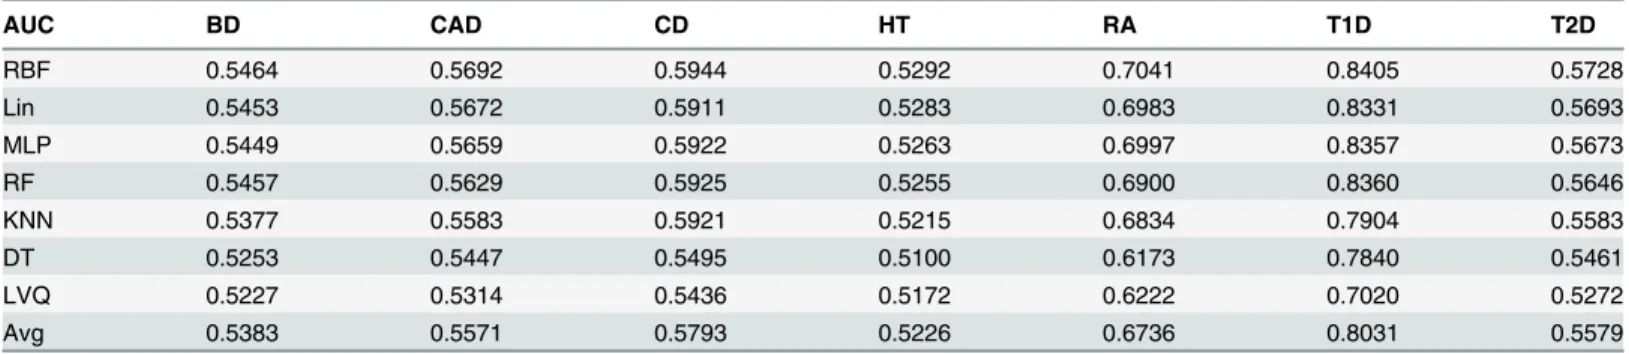 Table 10. Average AUC for each data set and algorithm over all p-value thresholds.